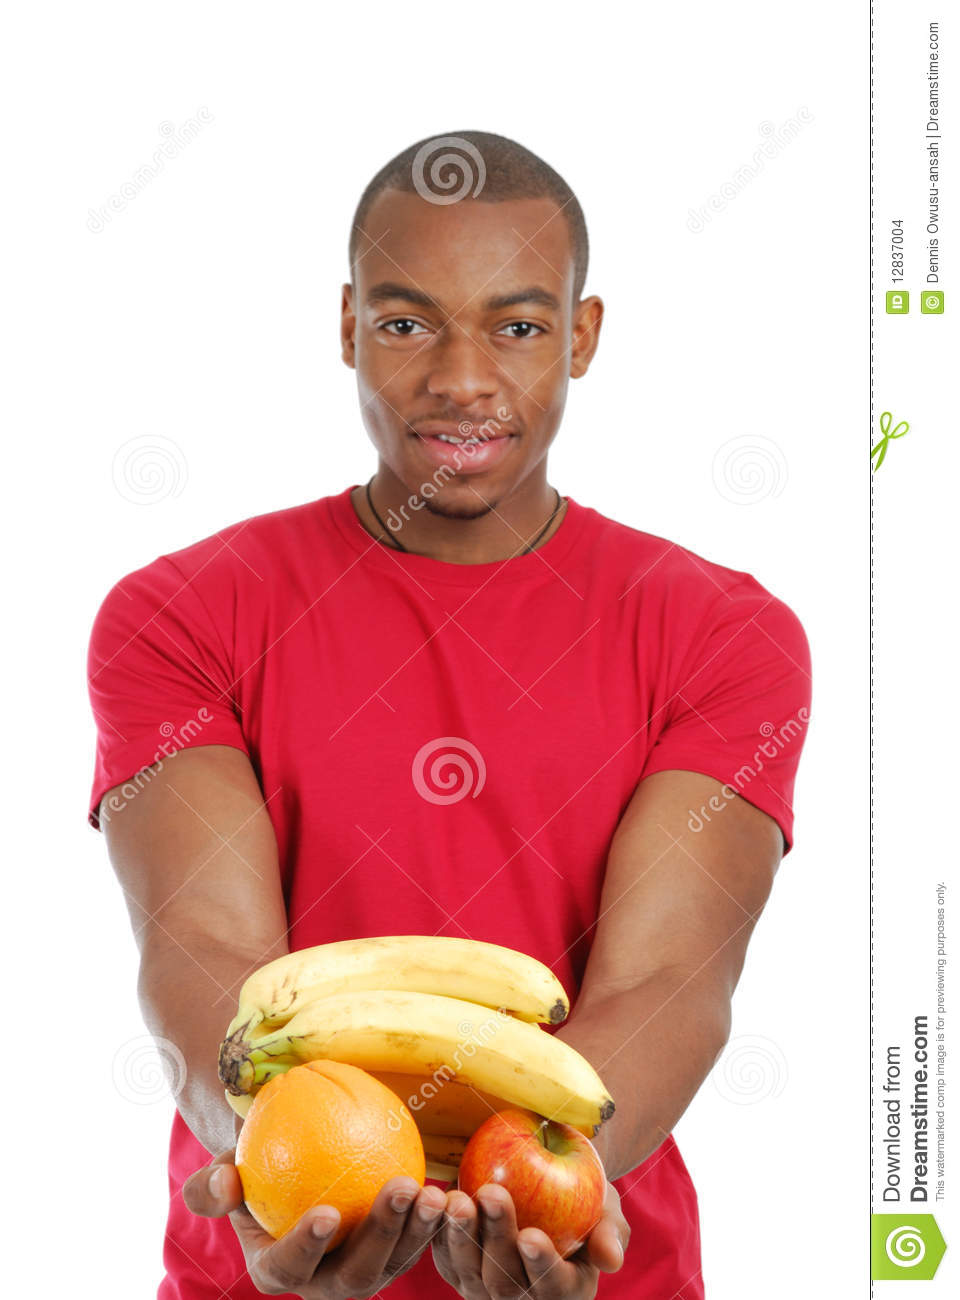 African American Man Holding Fruits Stock Images   Image  12837004